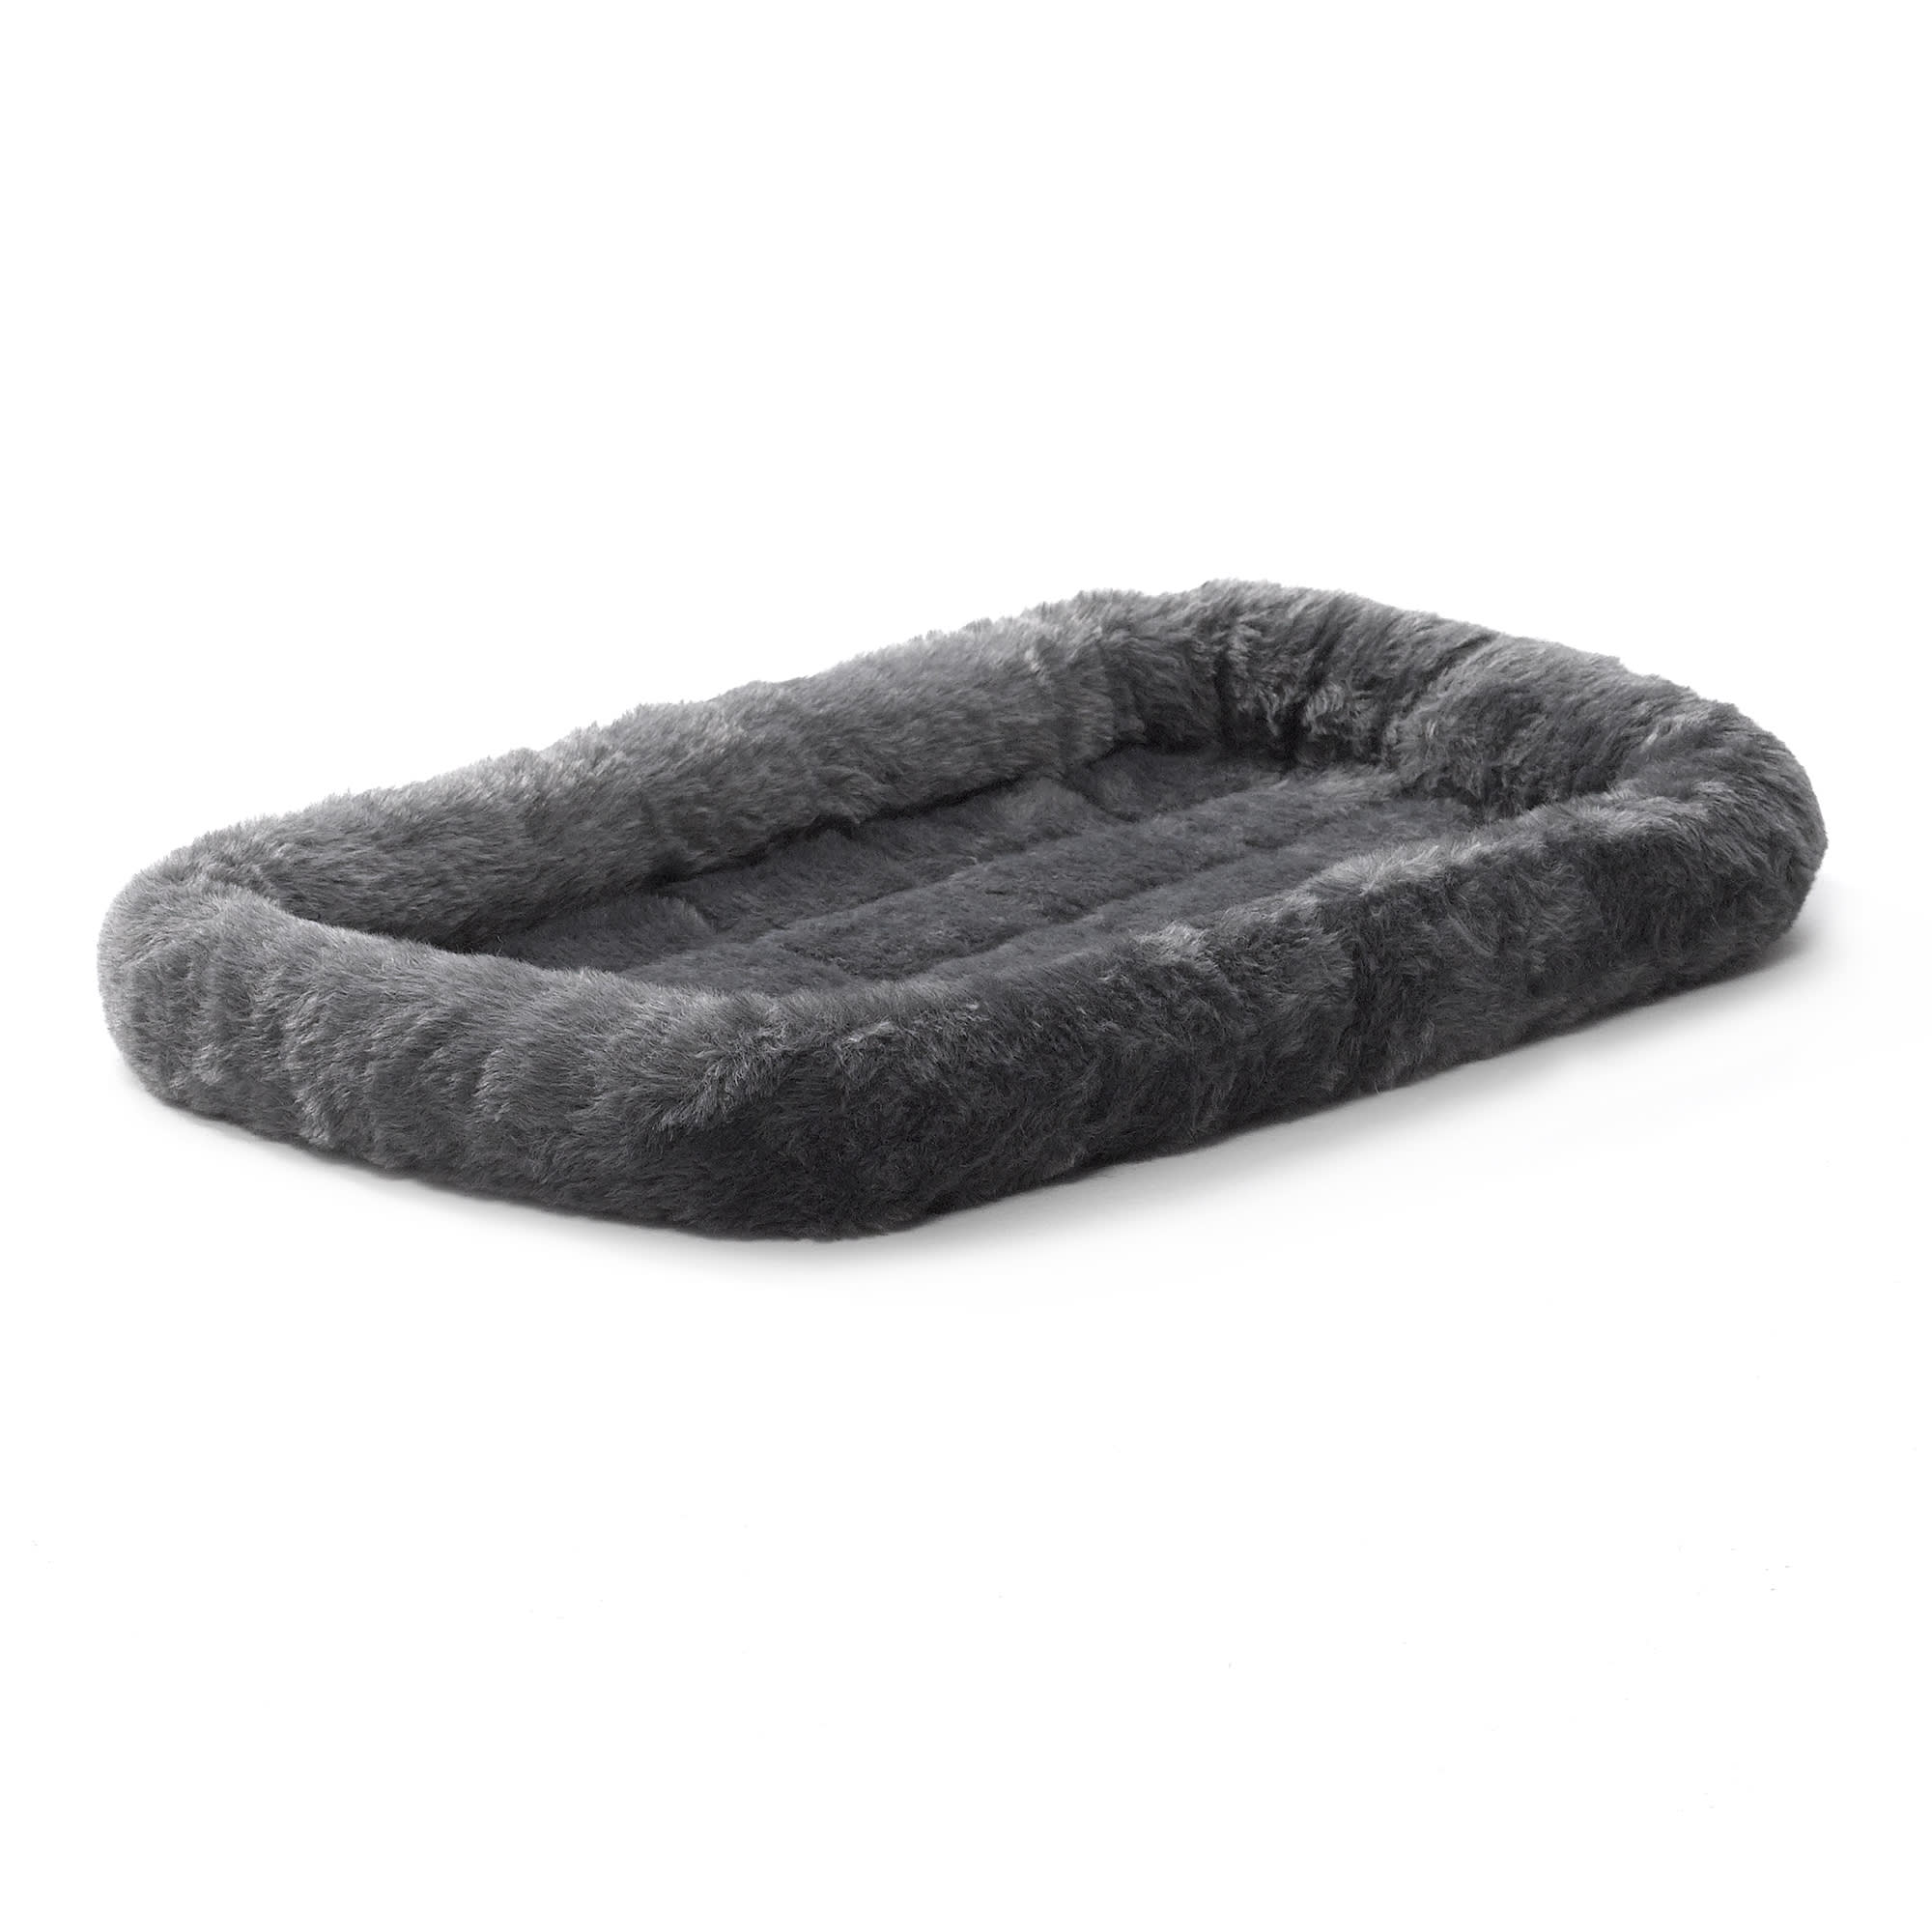 Midwest Quiet Time Bolster Gray Dog Bed, 18